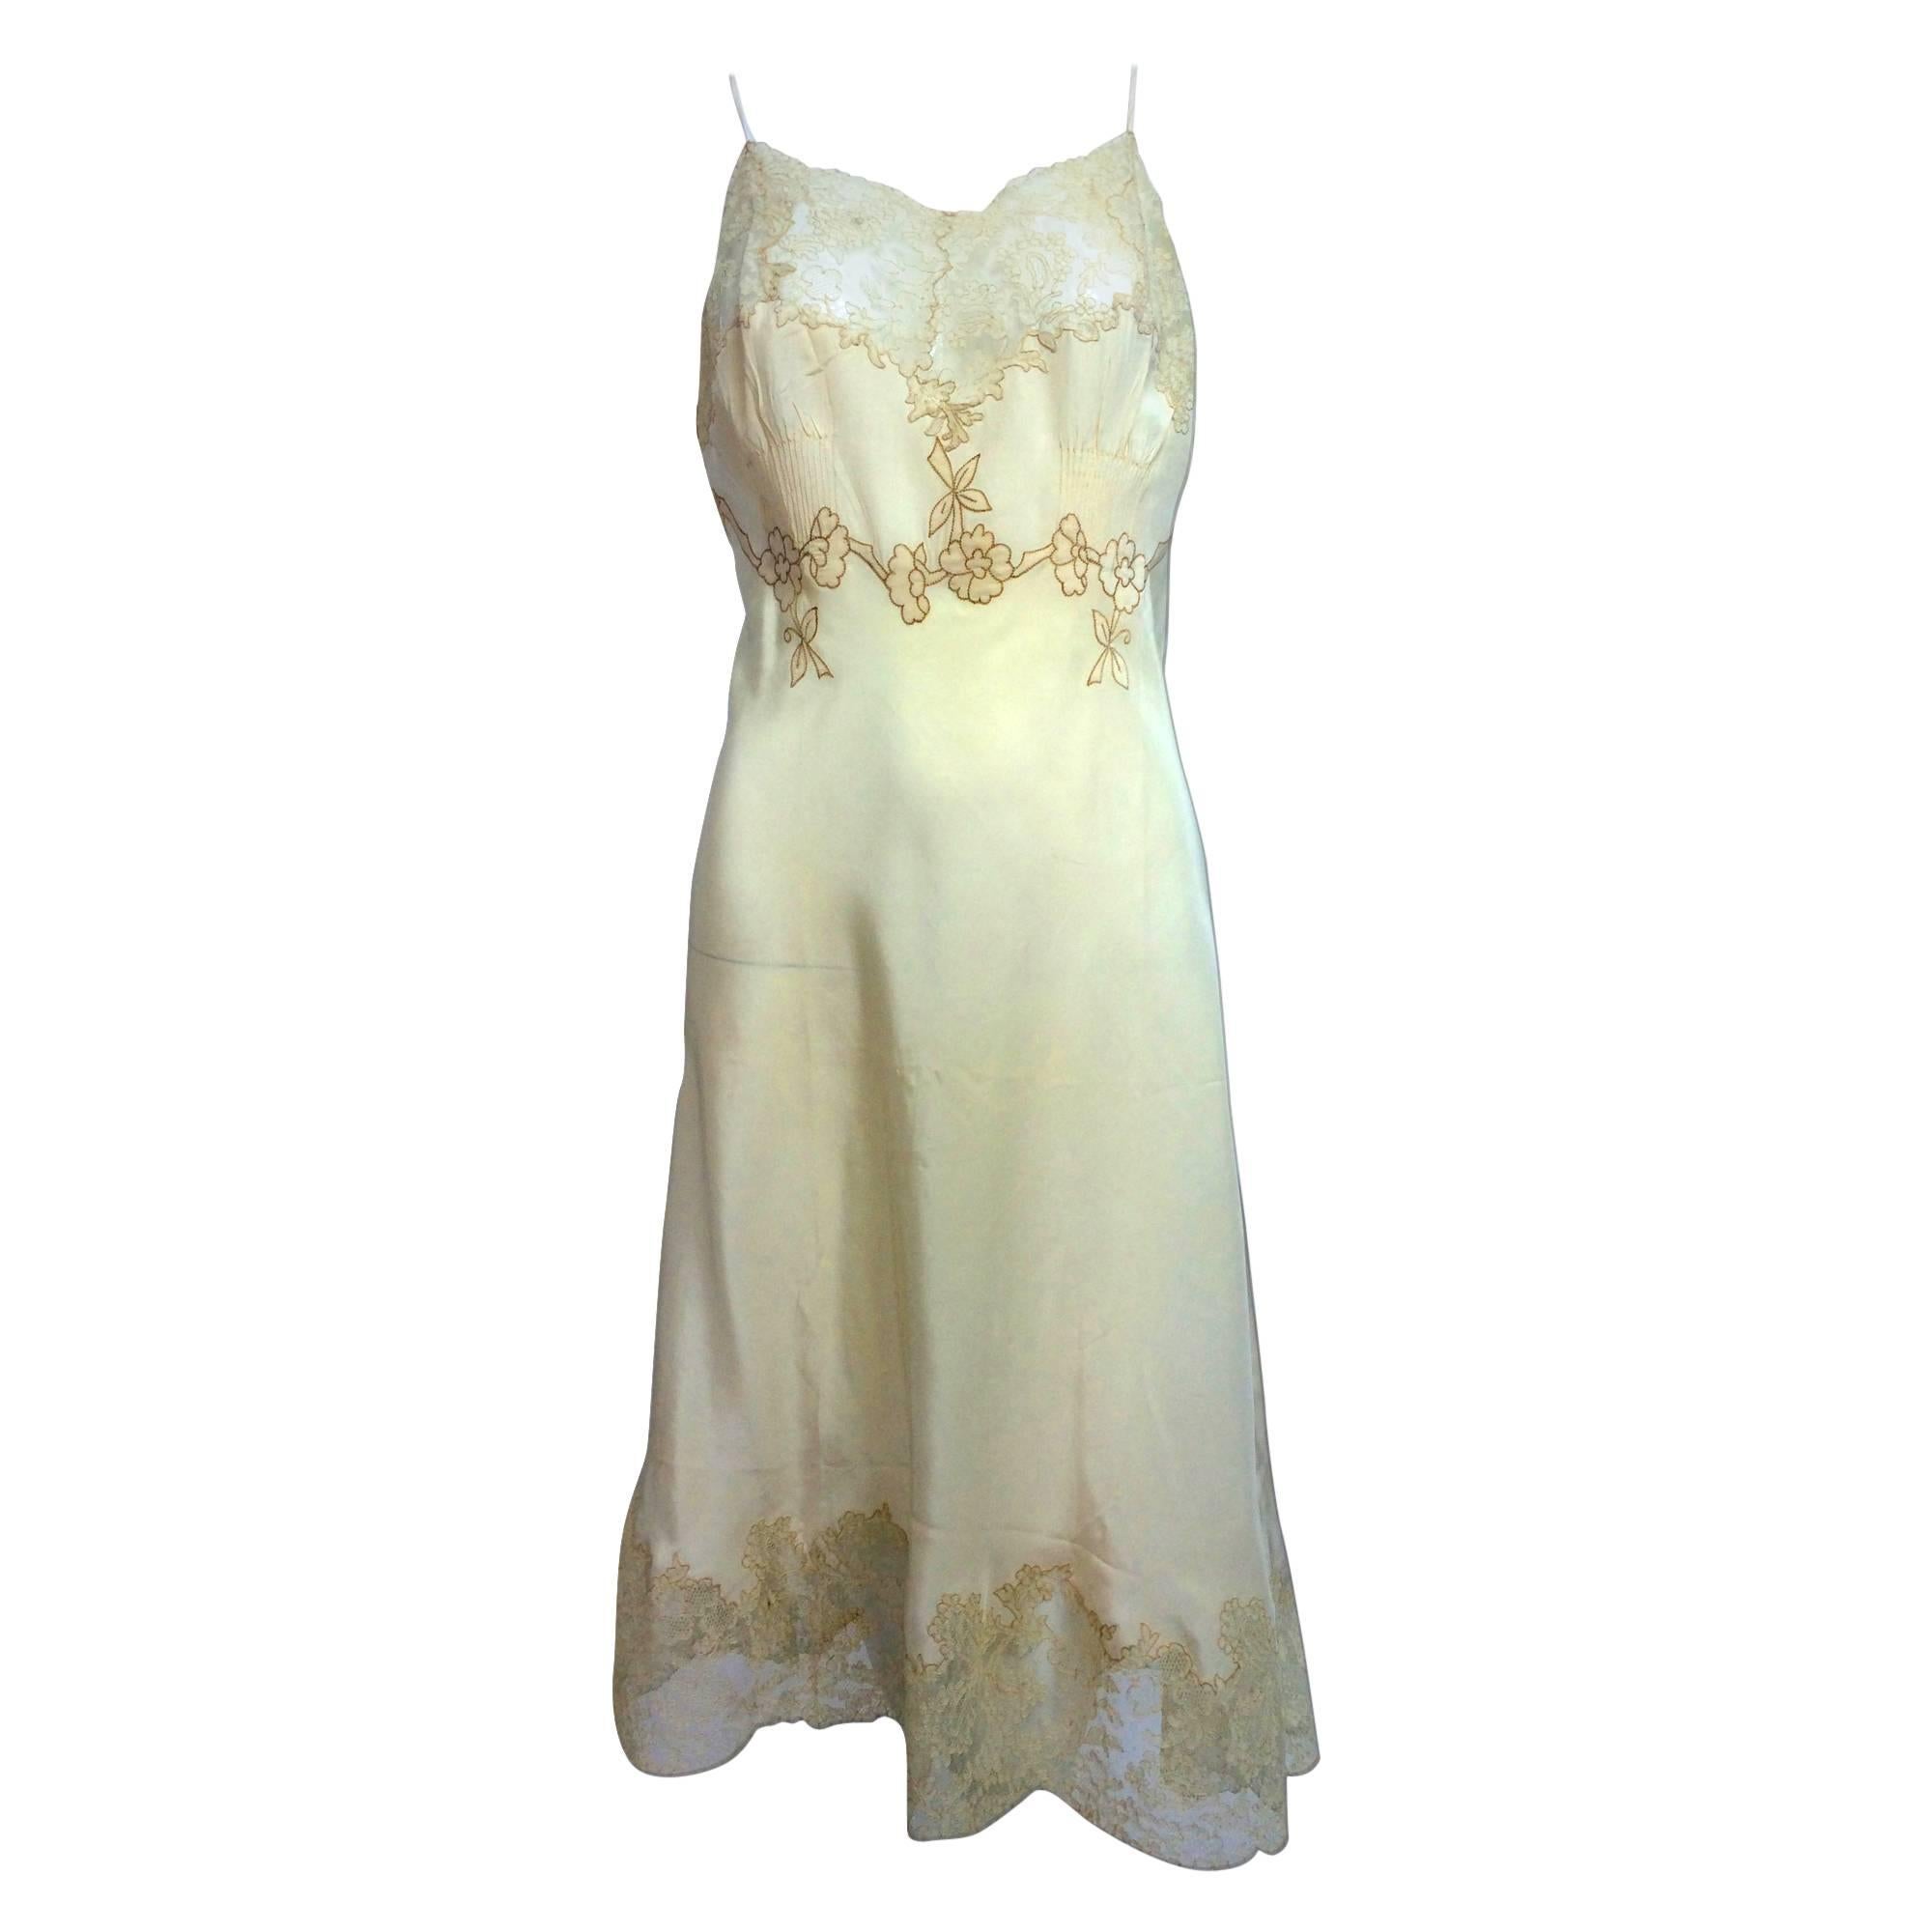 Superb vintage french hand embroidered nightgown